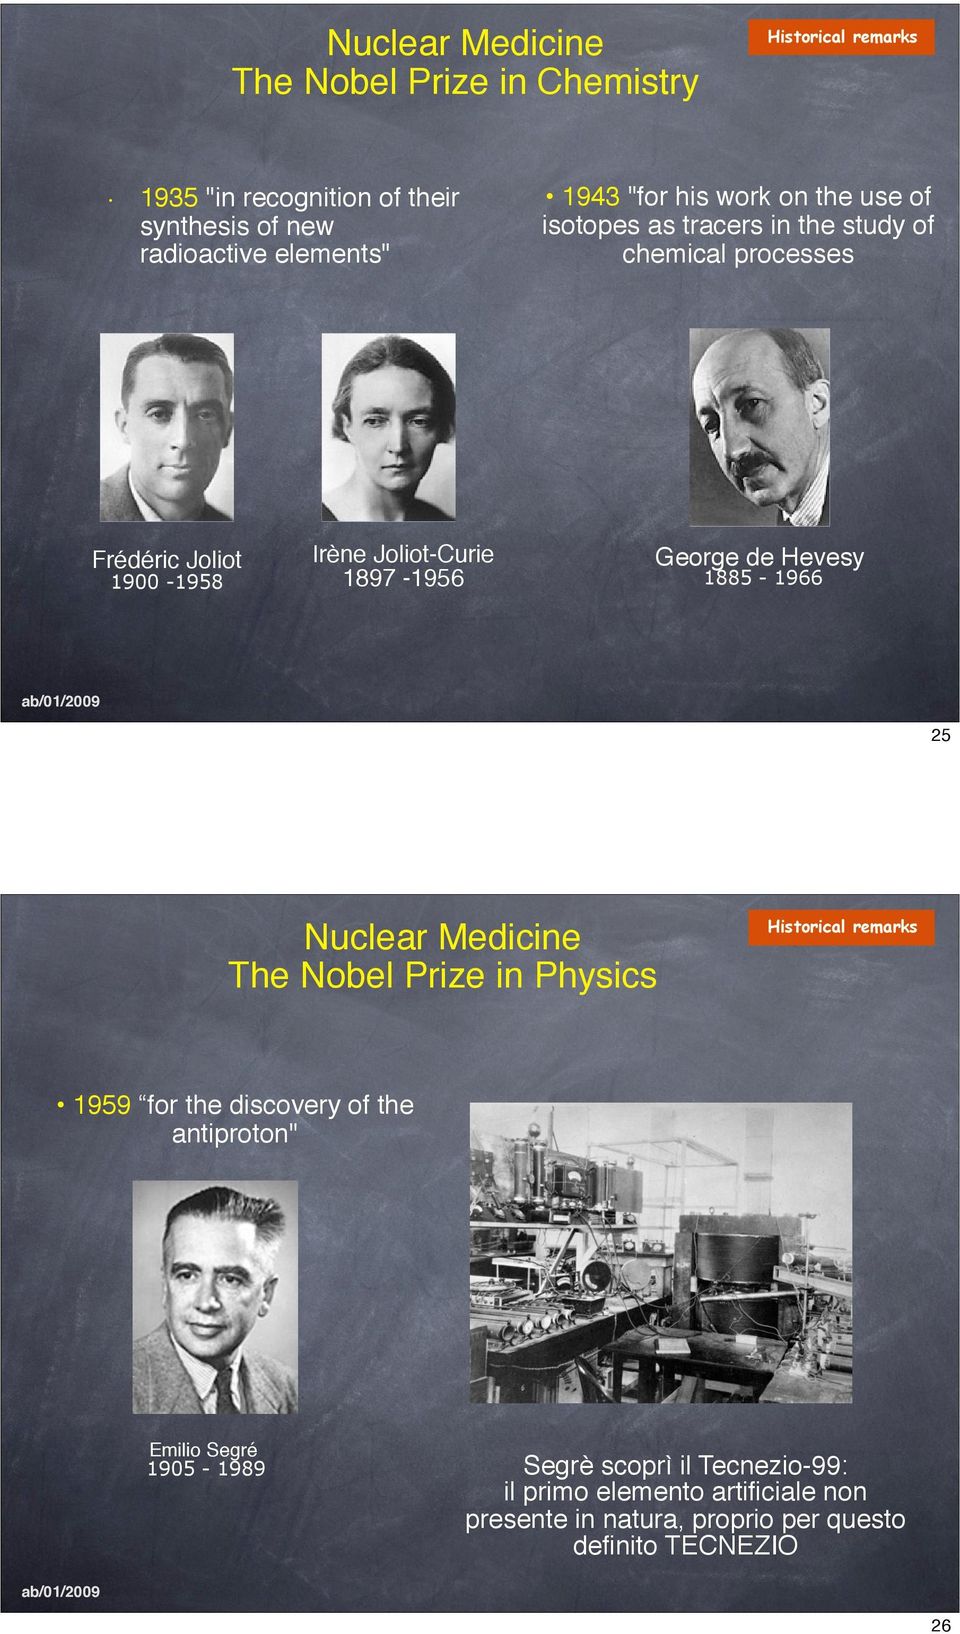 George de Hevesy 1885-1966 25 Nuclear Medicine The Nobel Prize in Physics Historical remarks 1959 for the discovery of the antiproton"